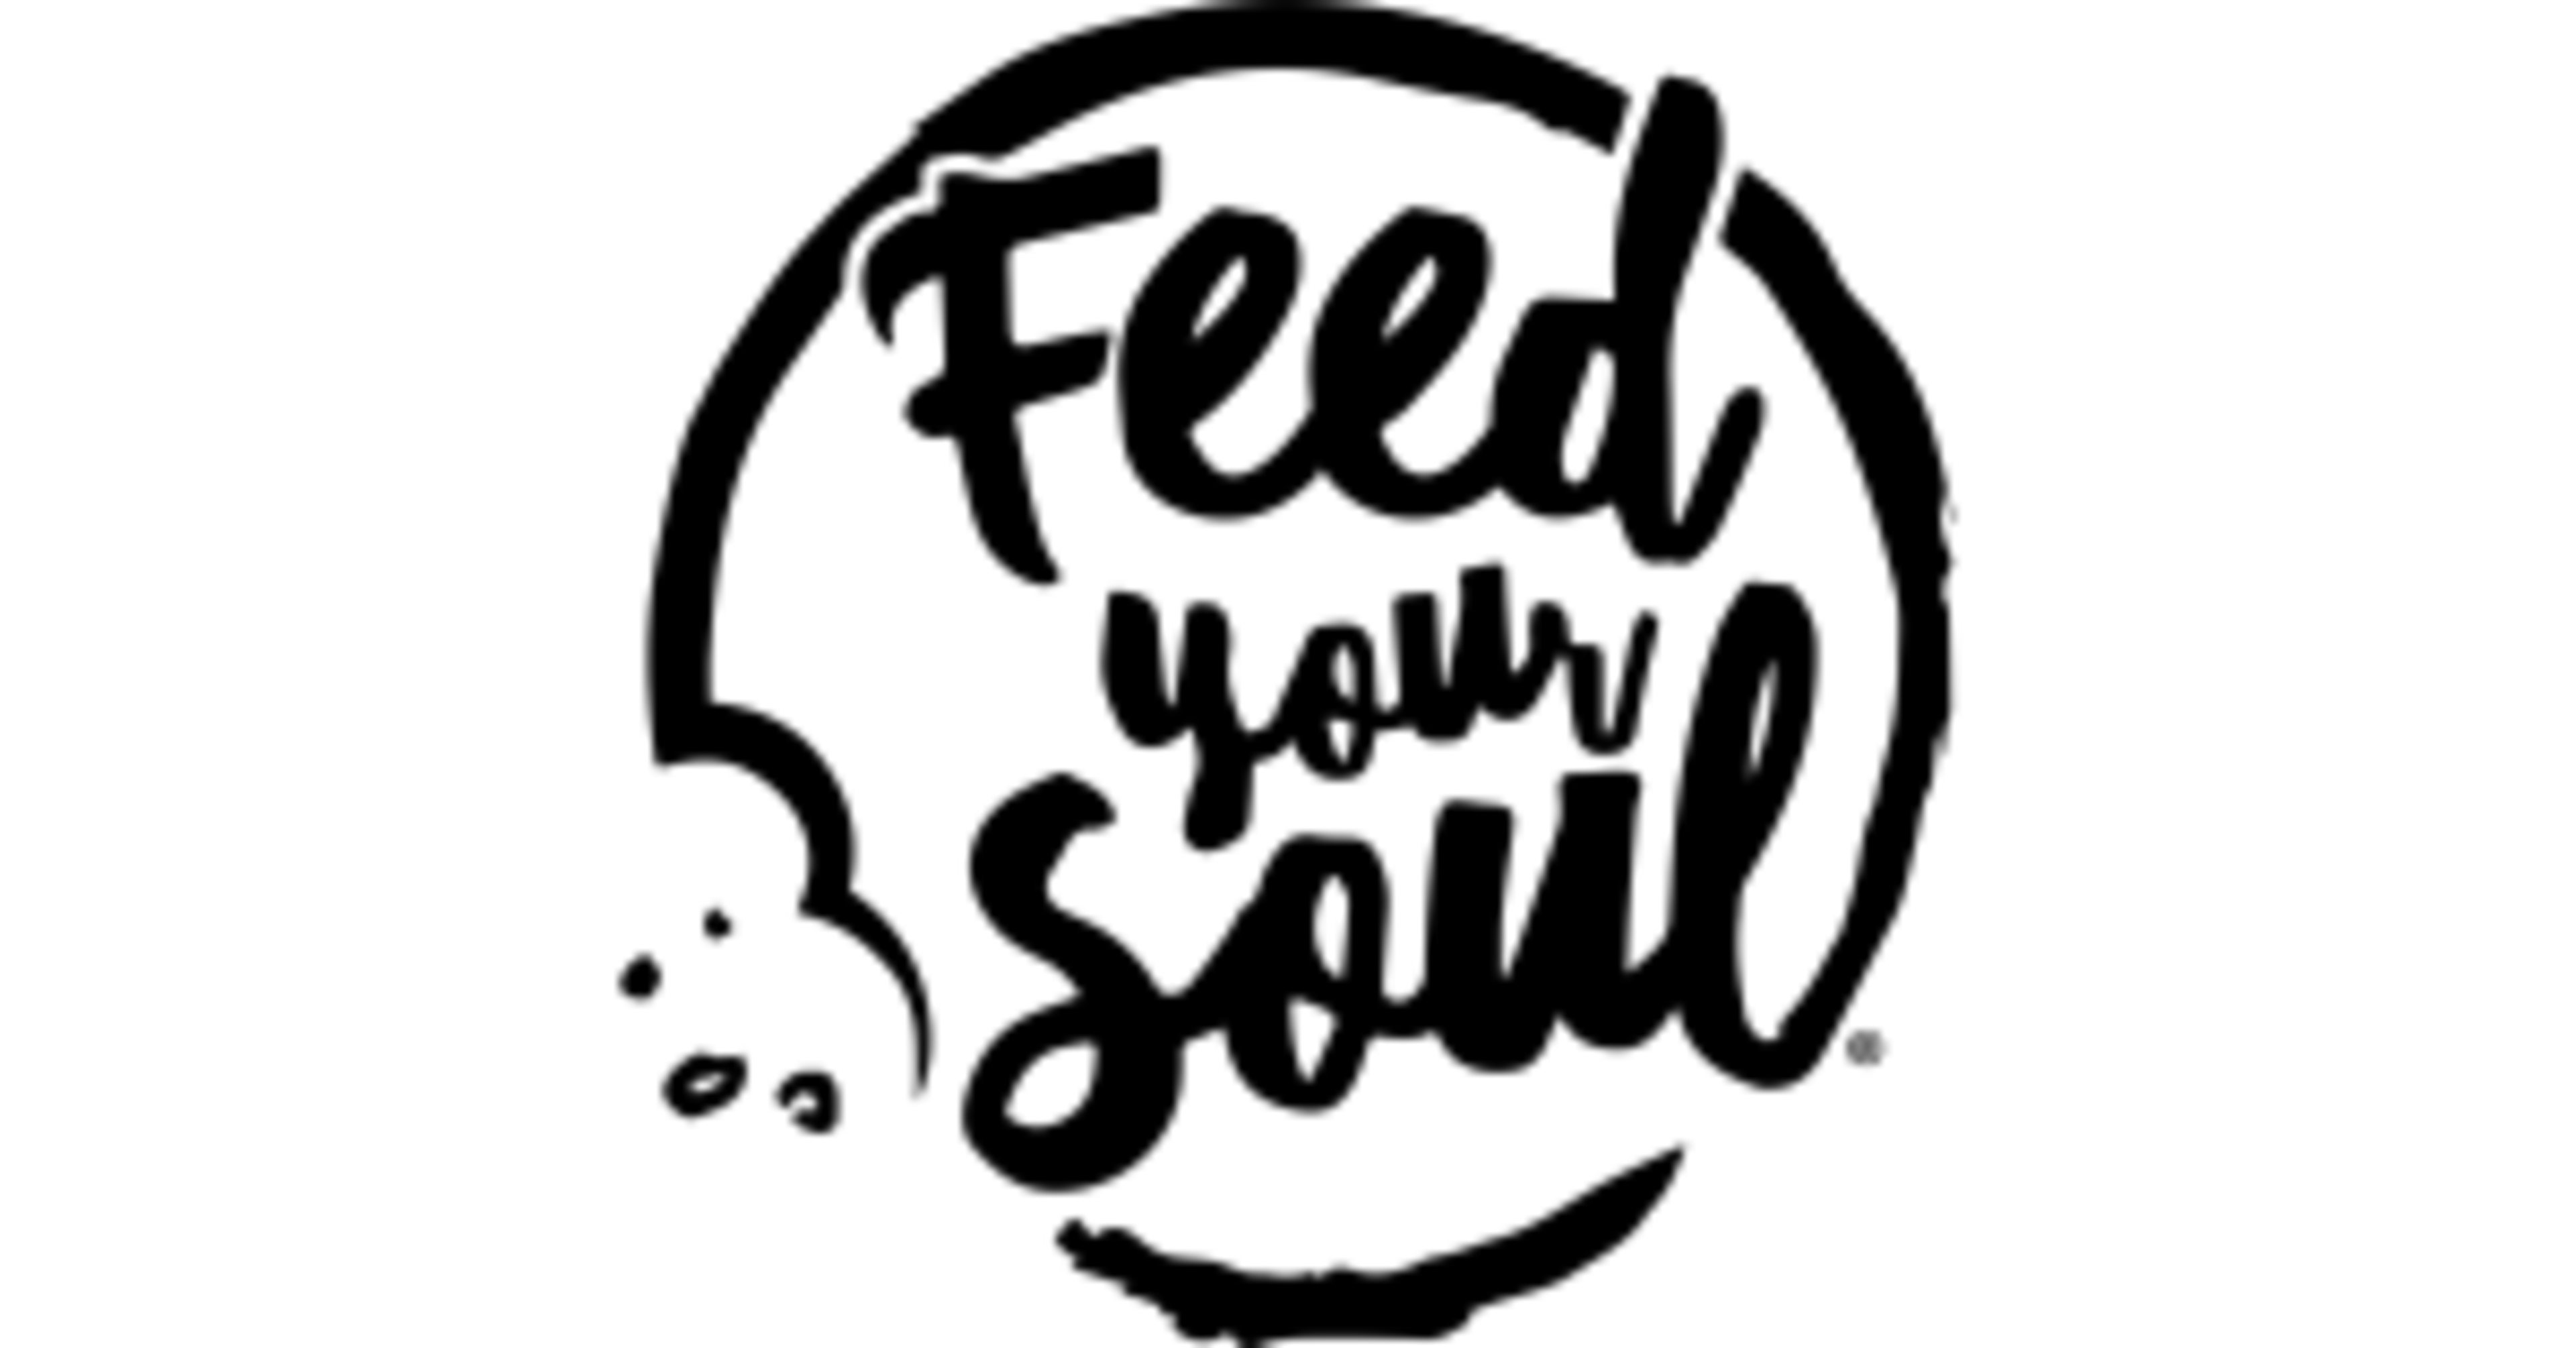 Feed Your Soul Bakery USCode